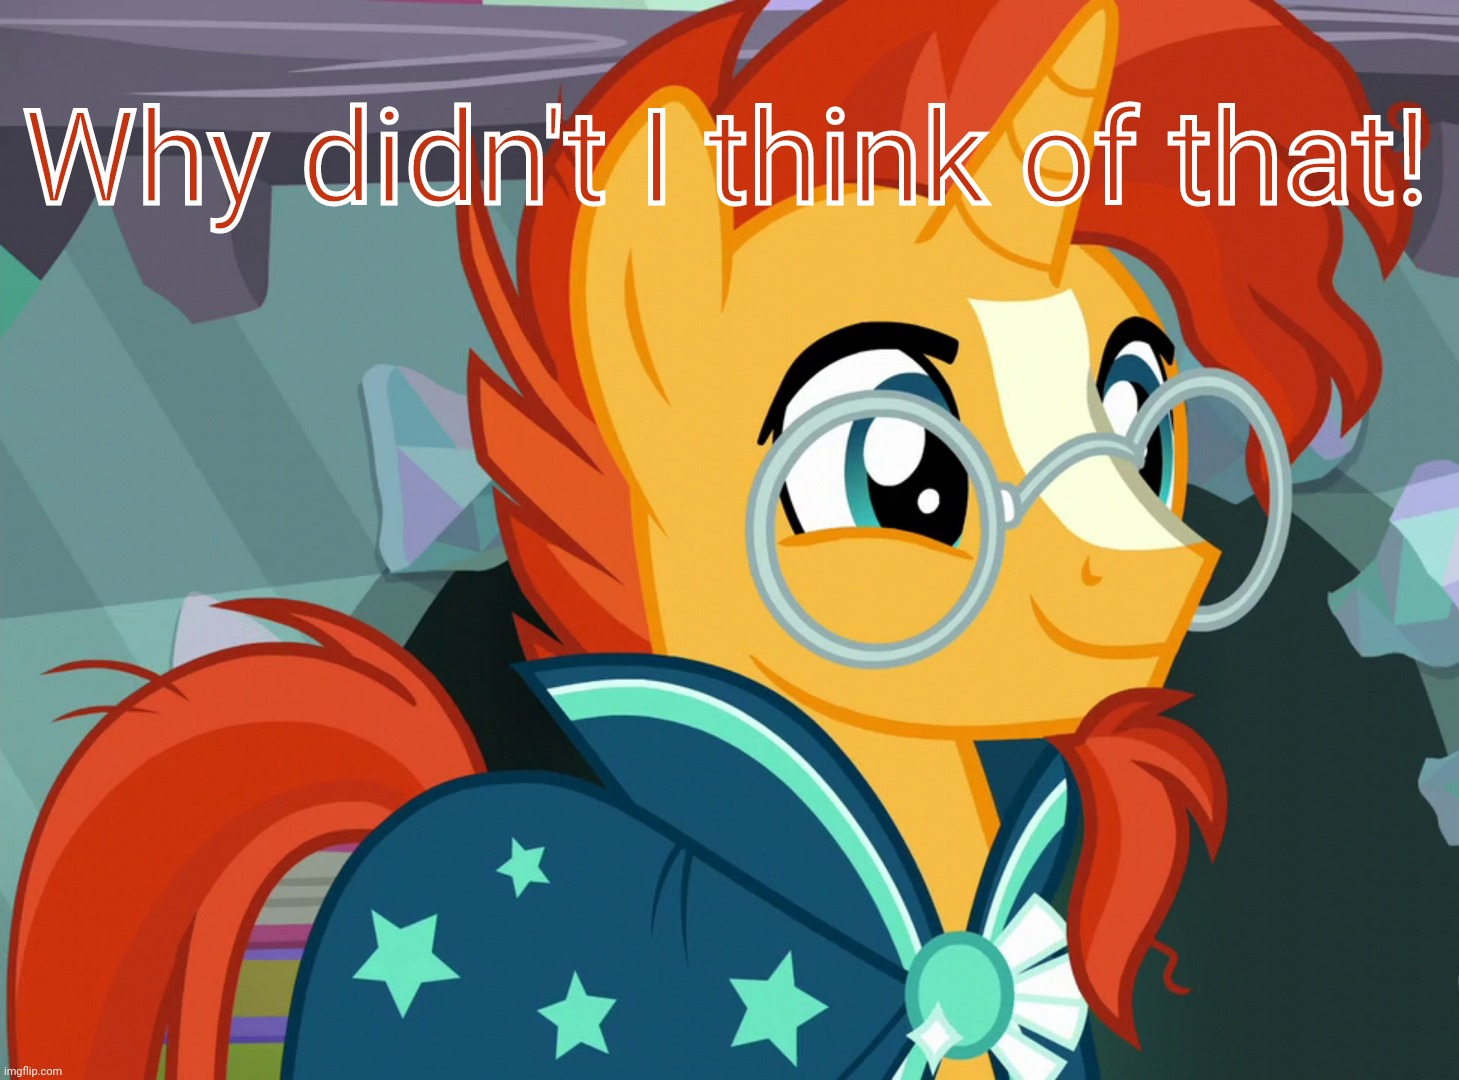 Happy Sunburst (MLP) | Why didn't I think of that! | image tagged in happy sunburst mlp | made w/ Imgflip meme maker